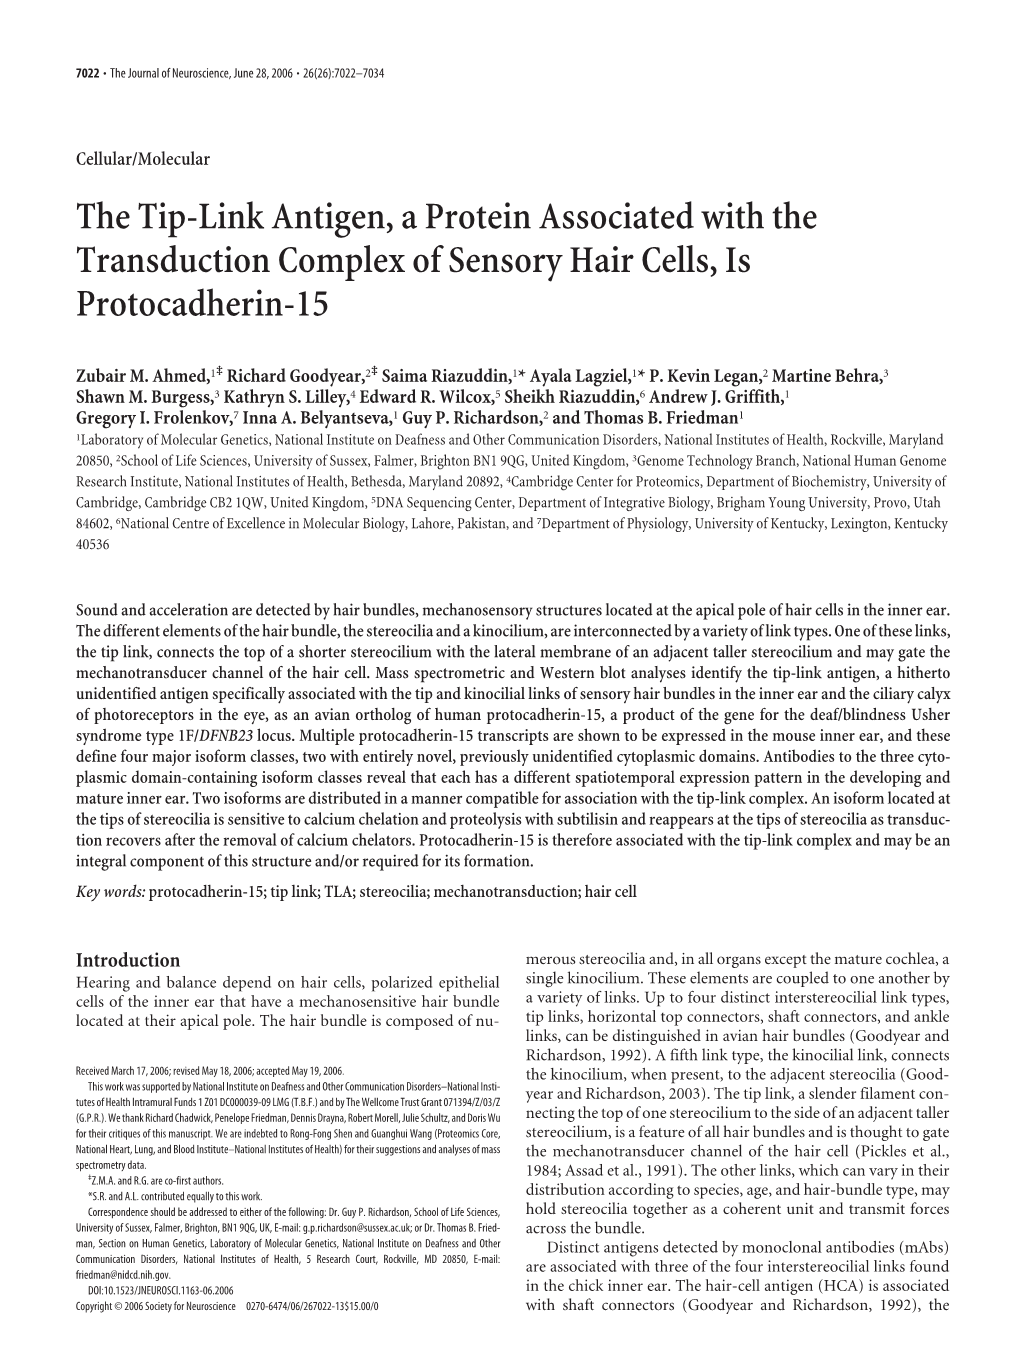 The Tip-Link Antigen, a Protein Associated with the Transduction Complex of Sensory Hair Cells, Is Protocadherin-15